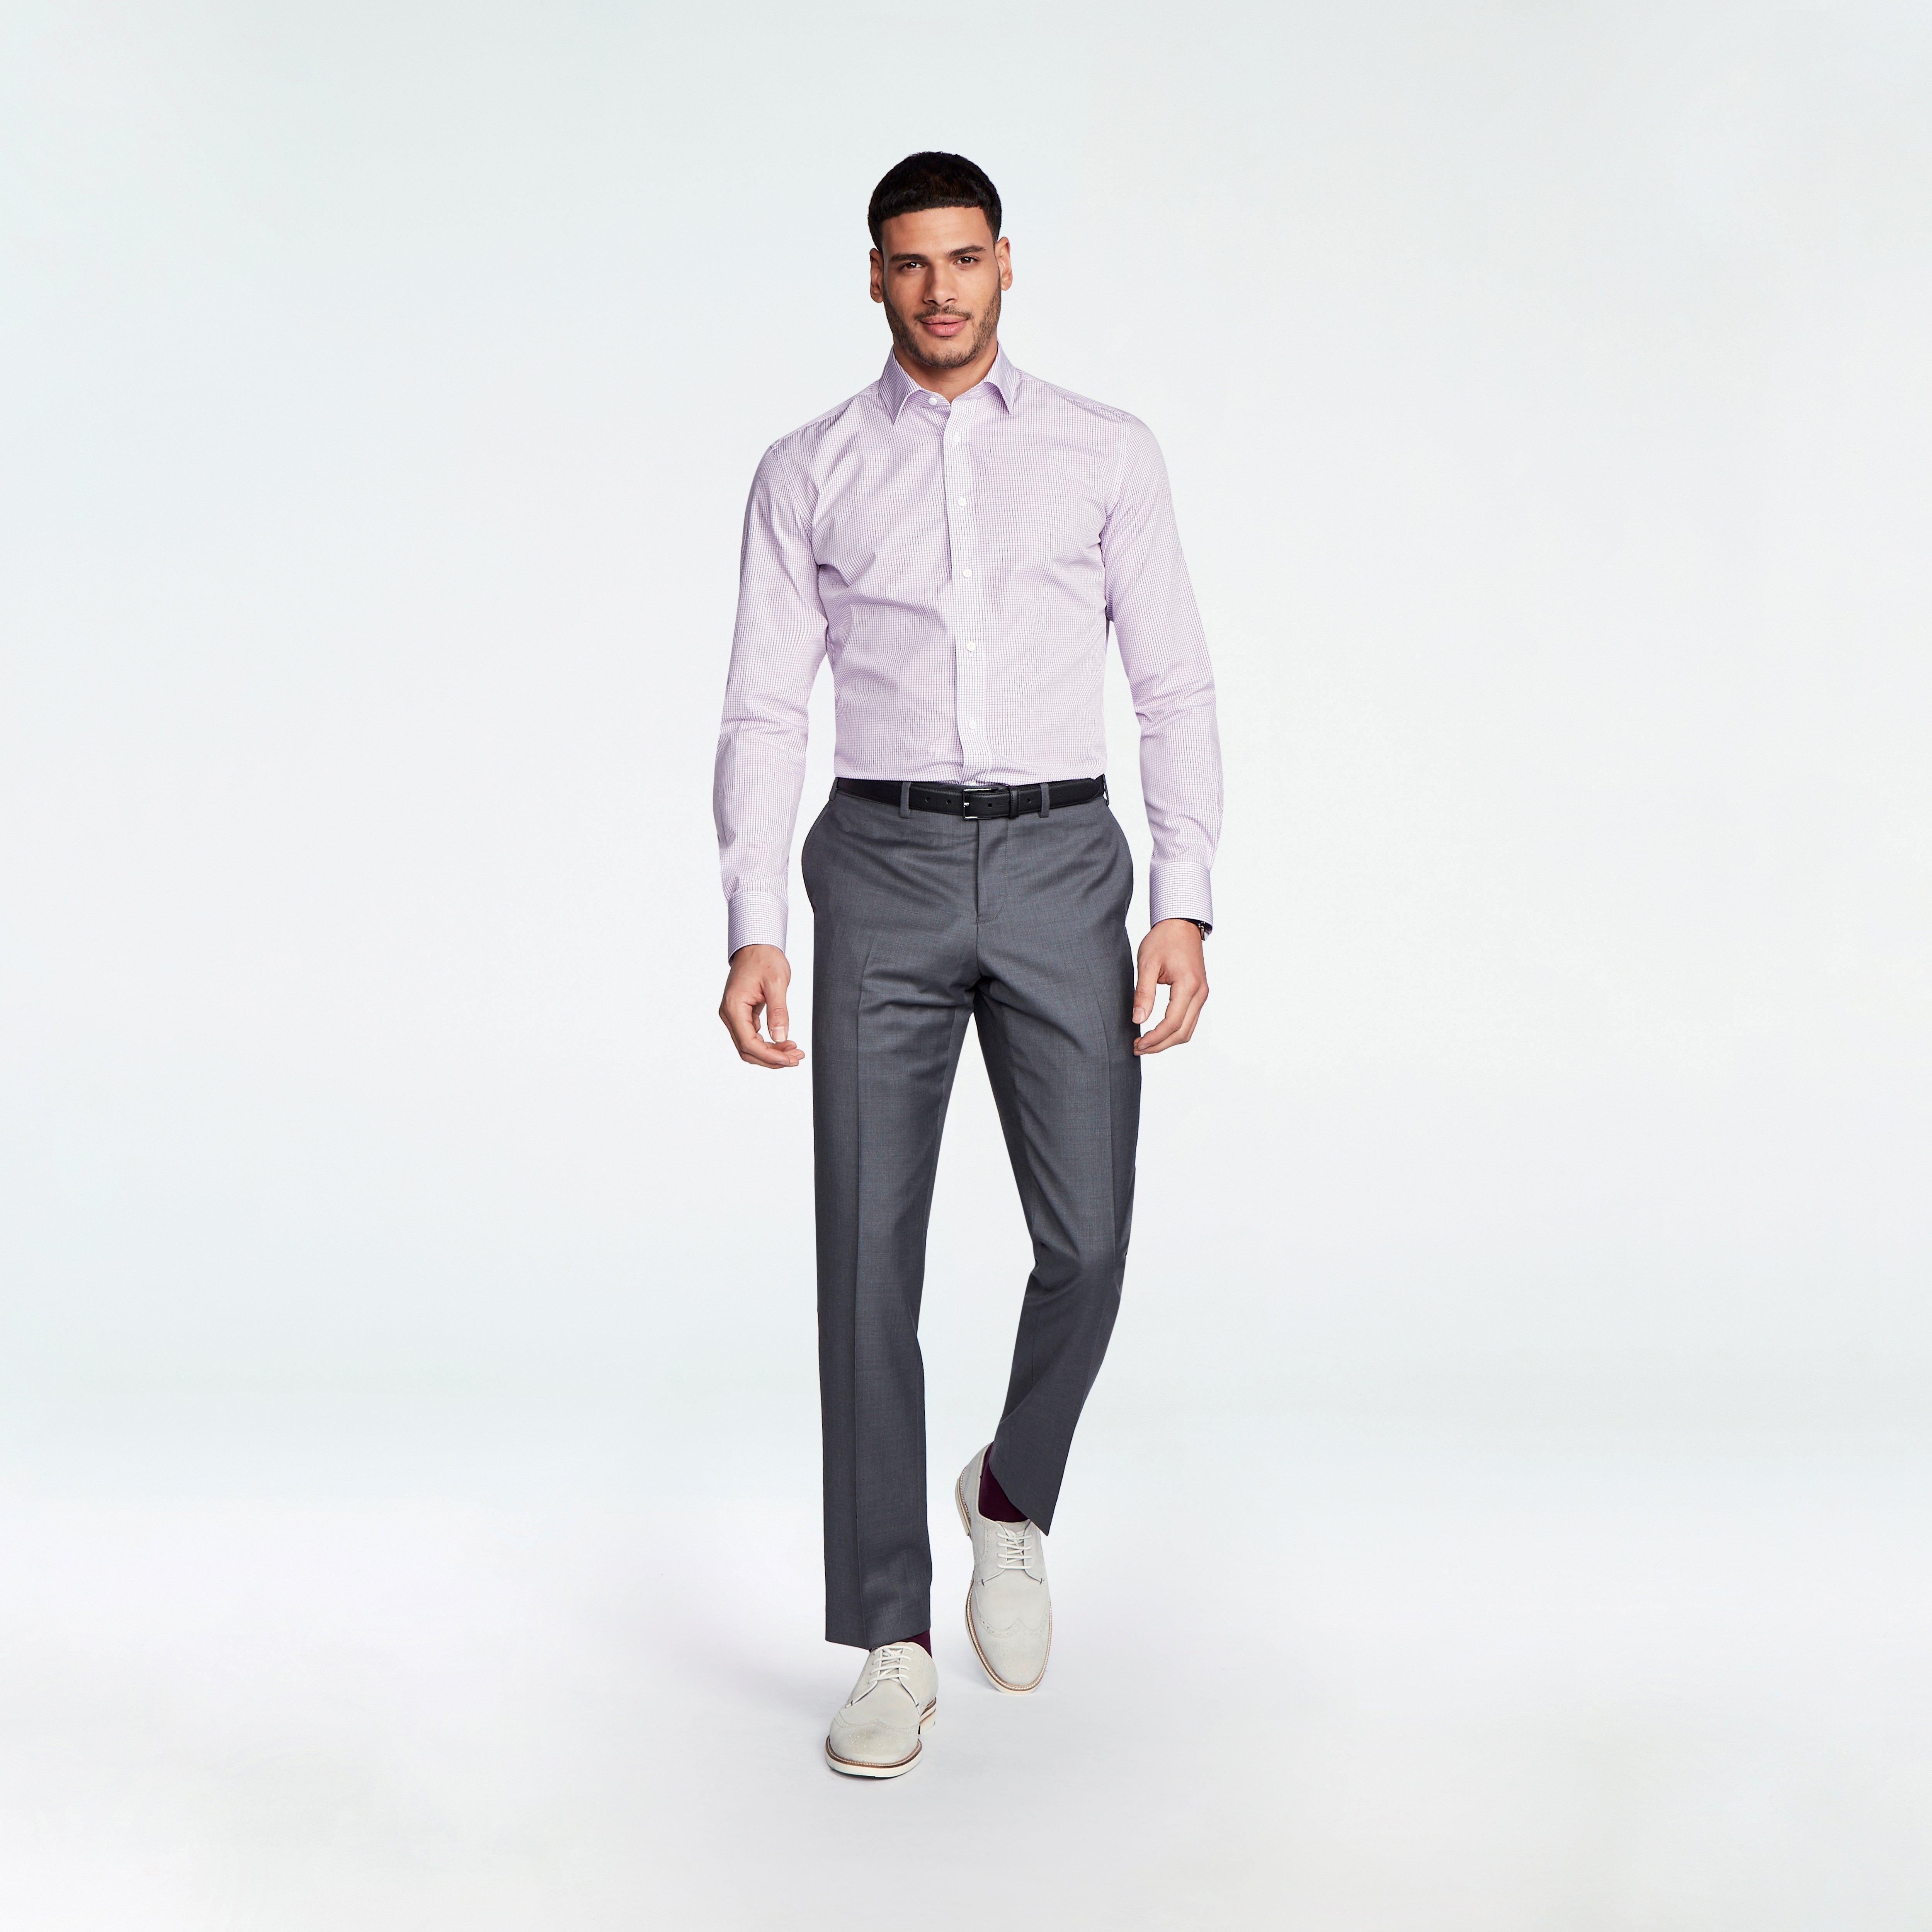 Indochino Dress Pants - Made to Measure